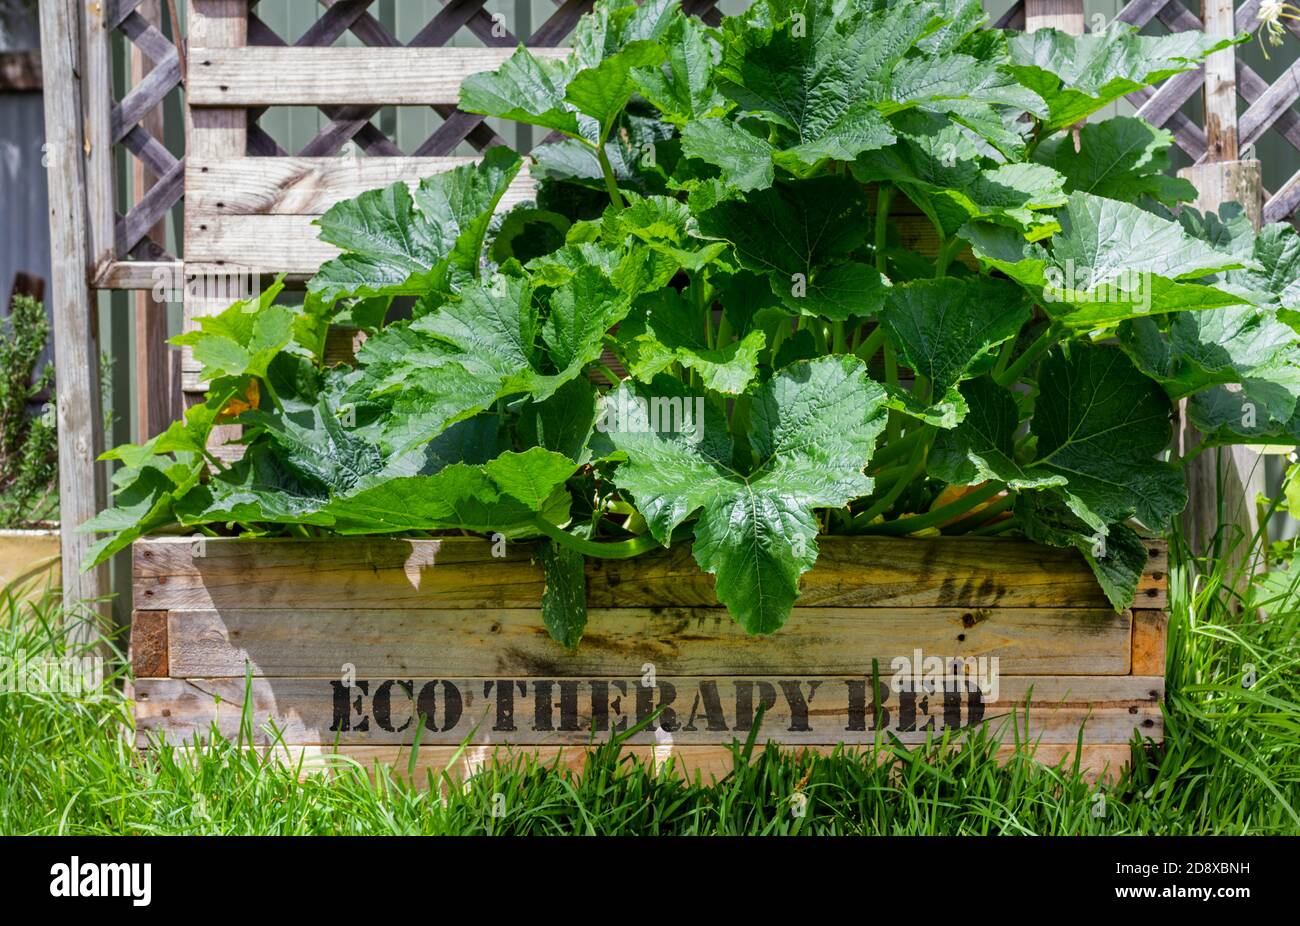 Sign on garden raised bed, Eco Therapy Bed,  gardening for mental health, getting back to nature concept Stock Photo